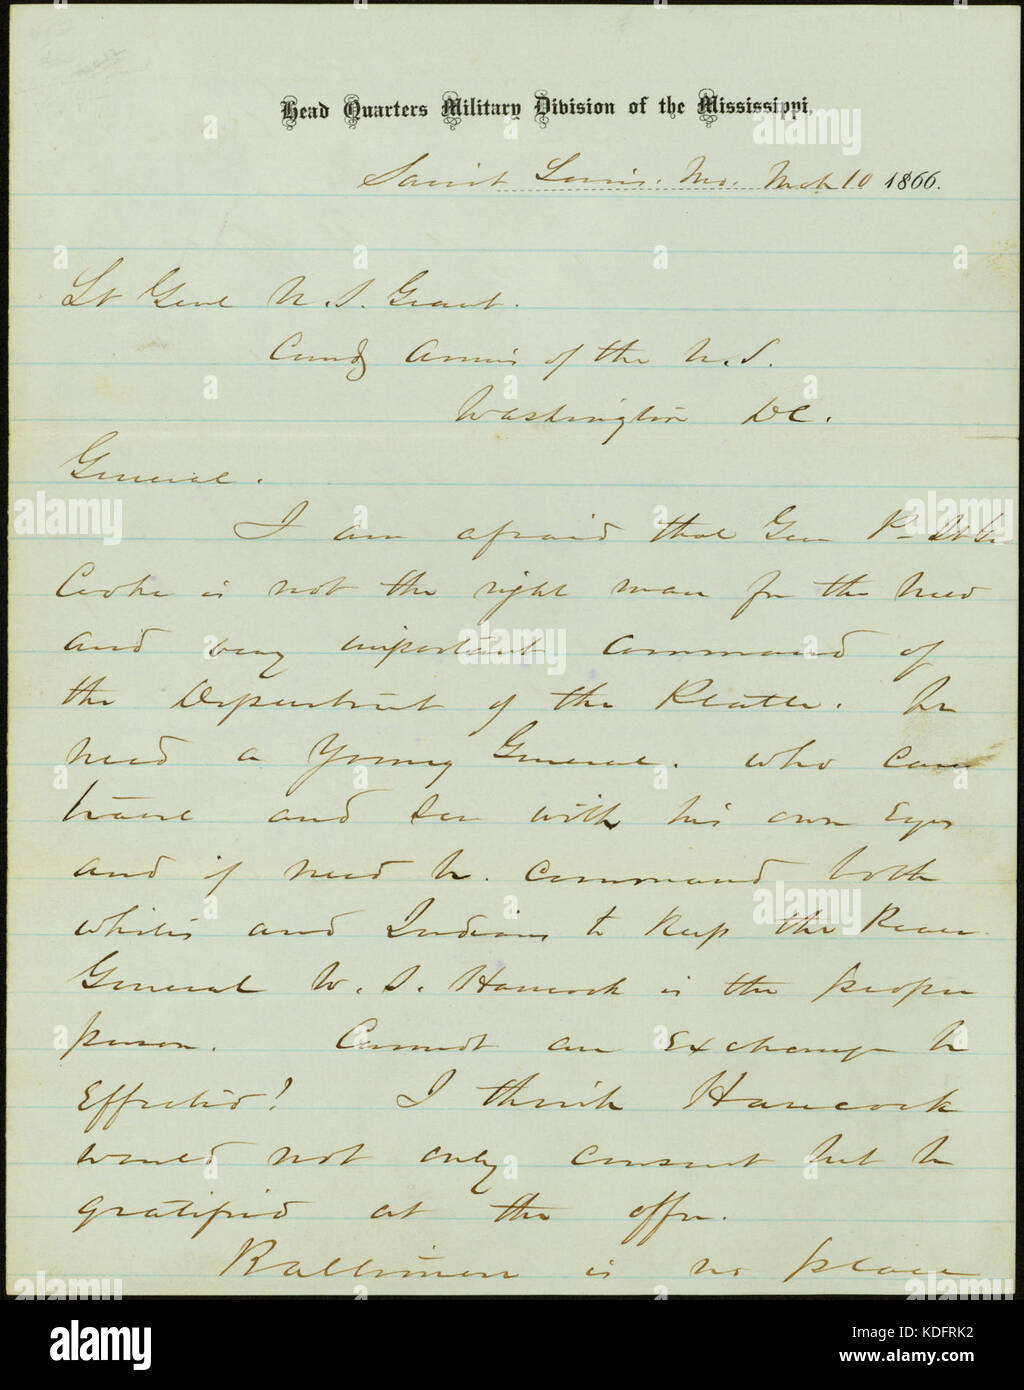 Letter sighed W.T. Sherman, Head Quarters Military DIvision of the Mississippi, Saint Louis, Mo., to Lt. Genl. U.S. Grant, Comd. Army of the U.S., Washington, D.C., March 10, 1866 Stock Photo